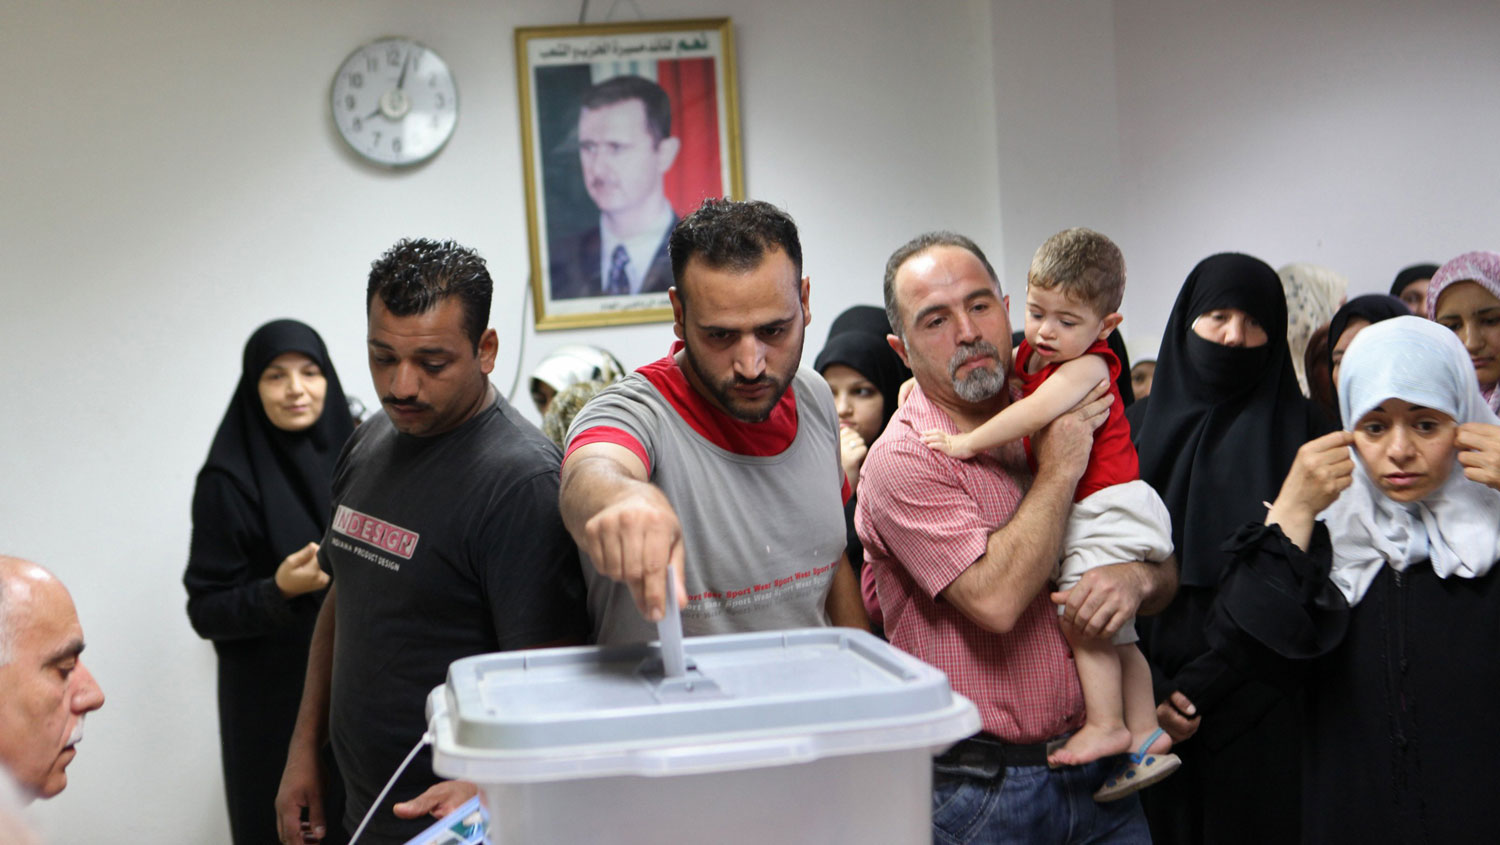 Syrians go to the polls in the Baset Alasad Sport Complex in Lattakia, Syria on June 3, 2014.